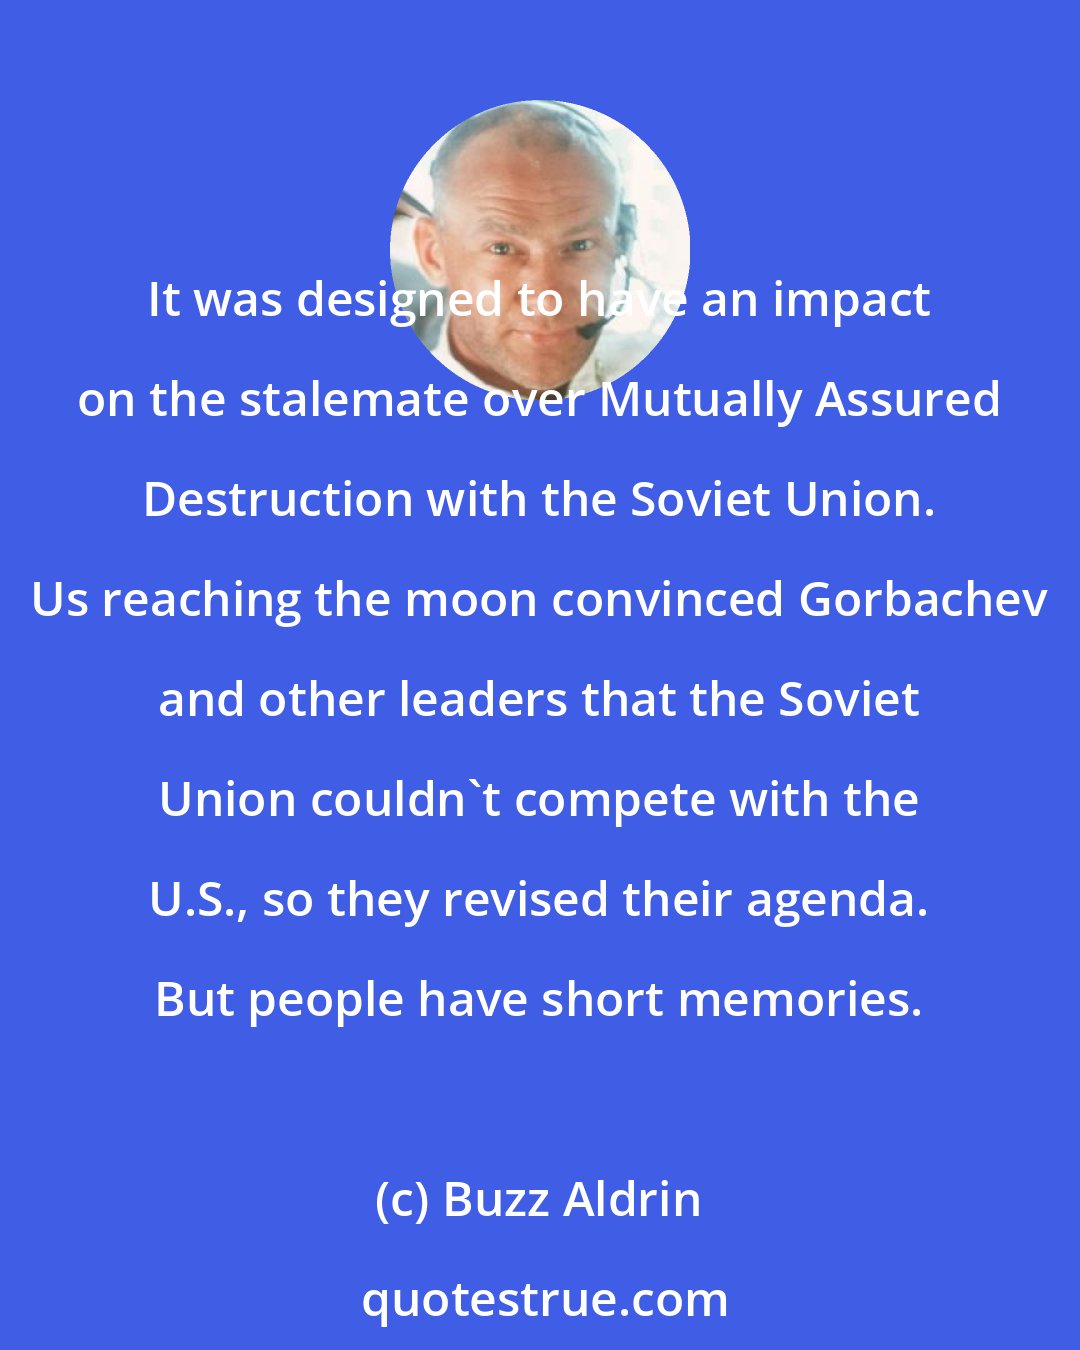 Buzz Aldrin: It was designed to have an impact on the stalemate over Mutually Assured Destruction with the Soviet Union. Us reaching the moon convinced Gorbachev and other leaders that the Soviet Union couldn't compete with the U.S., so they revised their agenda. But people have short memories.